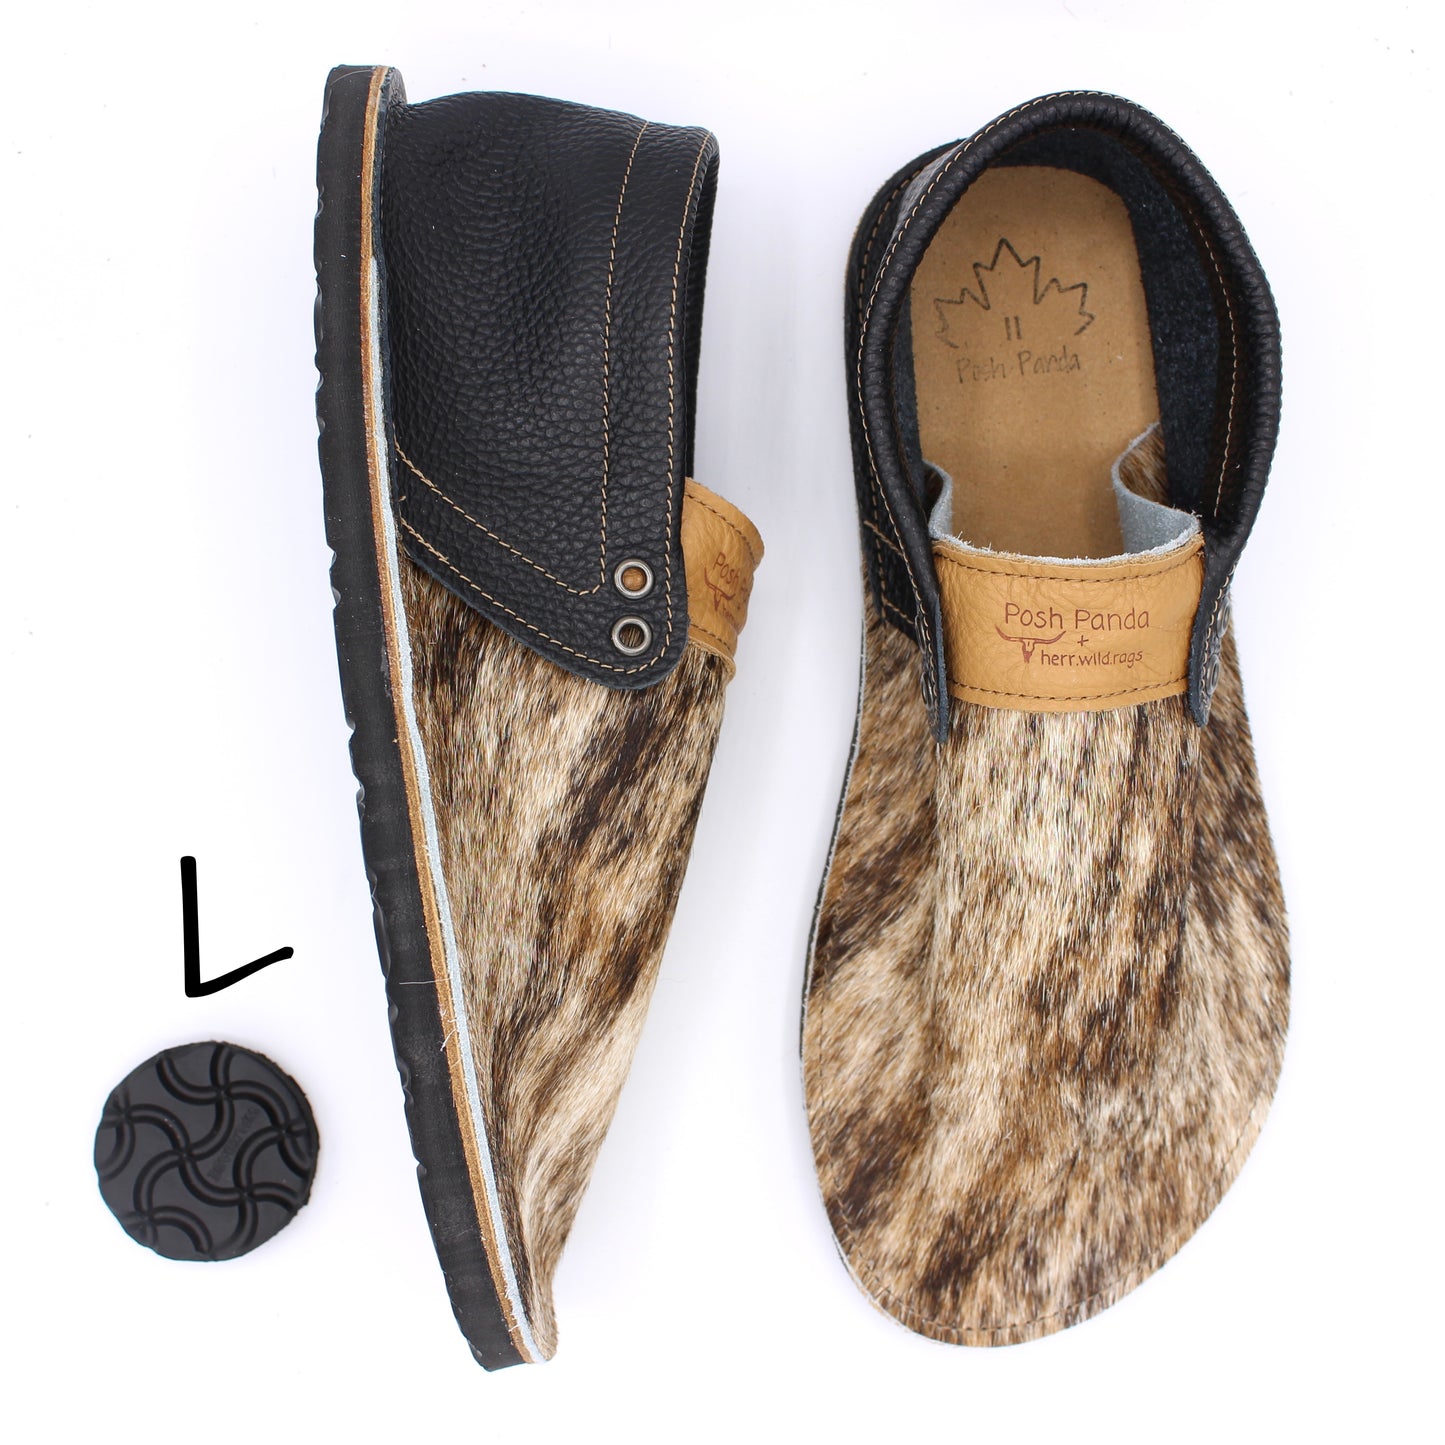 Hair Hide Collab Mocs - Ladies - SIZE 11 - RUGGED